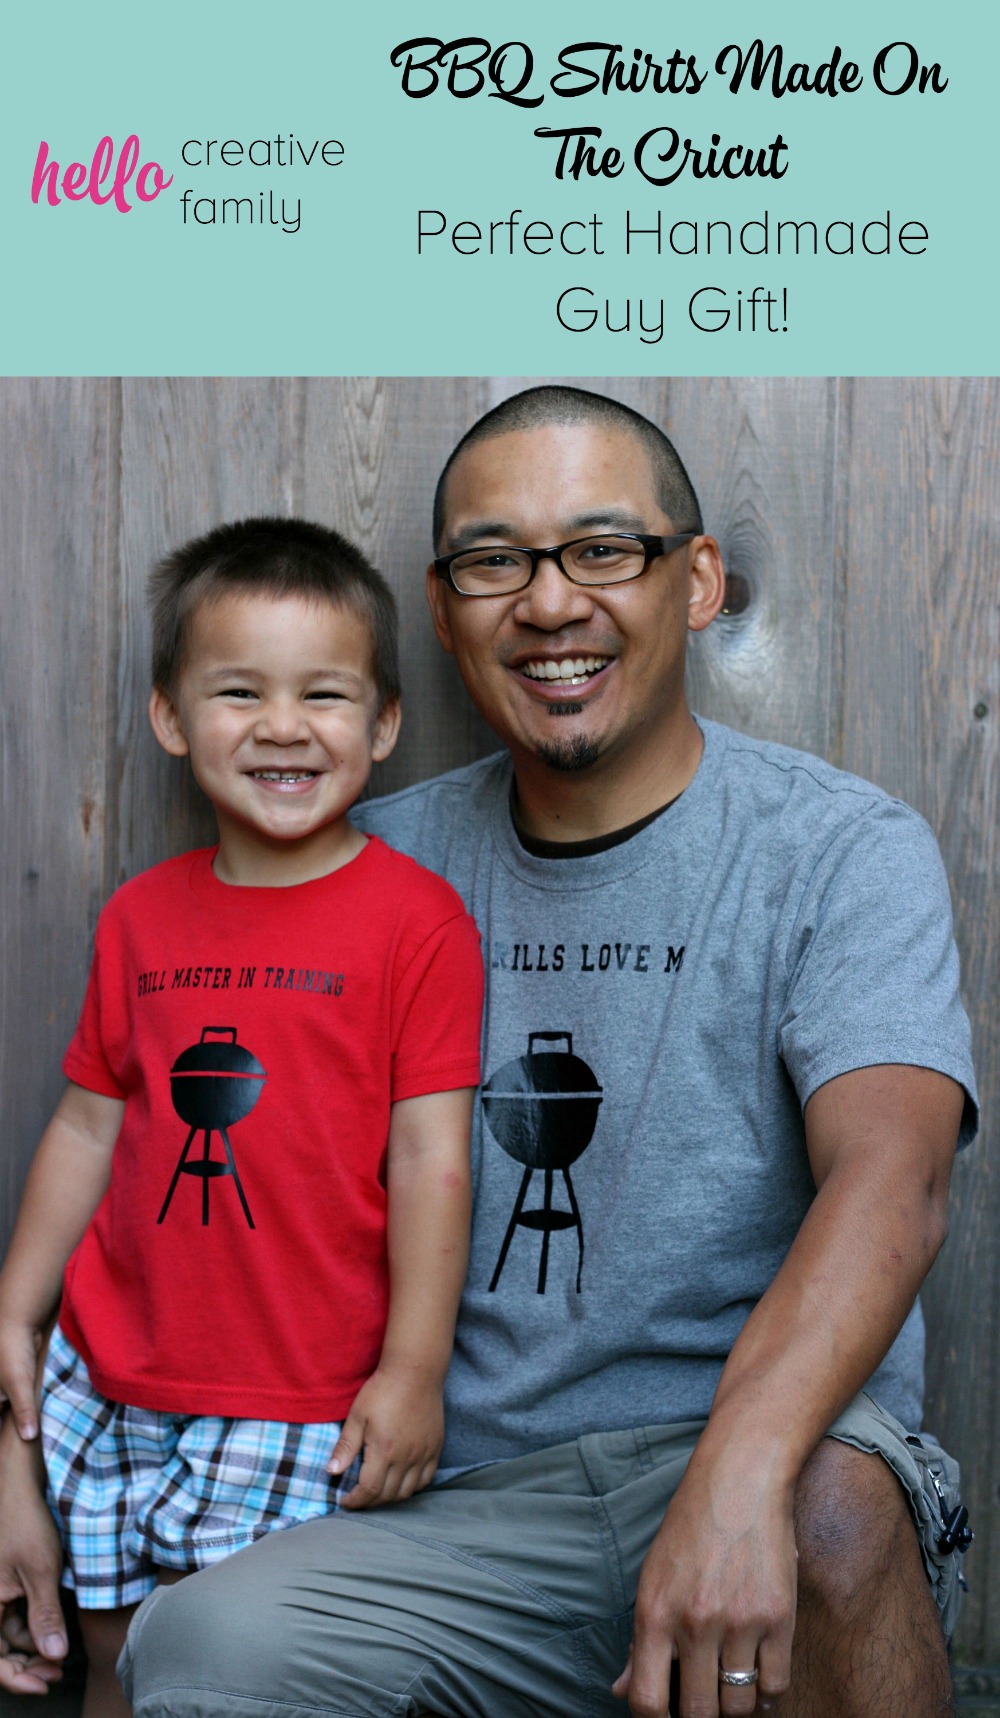 Know a guy (or gal) who's crazy for BBQ? Whip the up one of 4 BBQ Shirts from Hello Creative Family. The perfect handmade guy gift! A fabulous Cricut project perfect for Father's Day, Christmas or Birthdays!